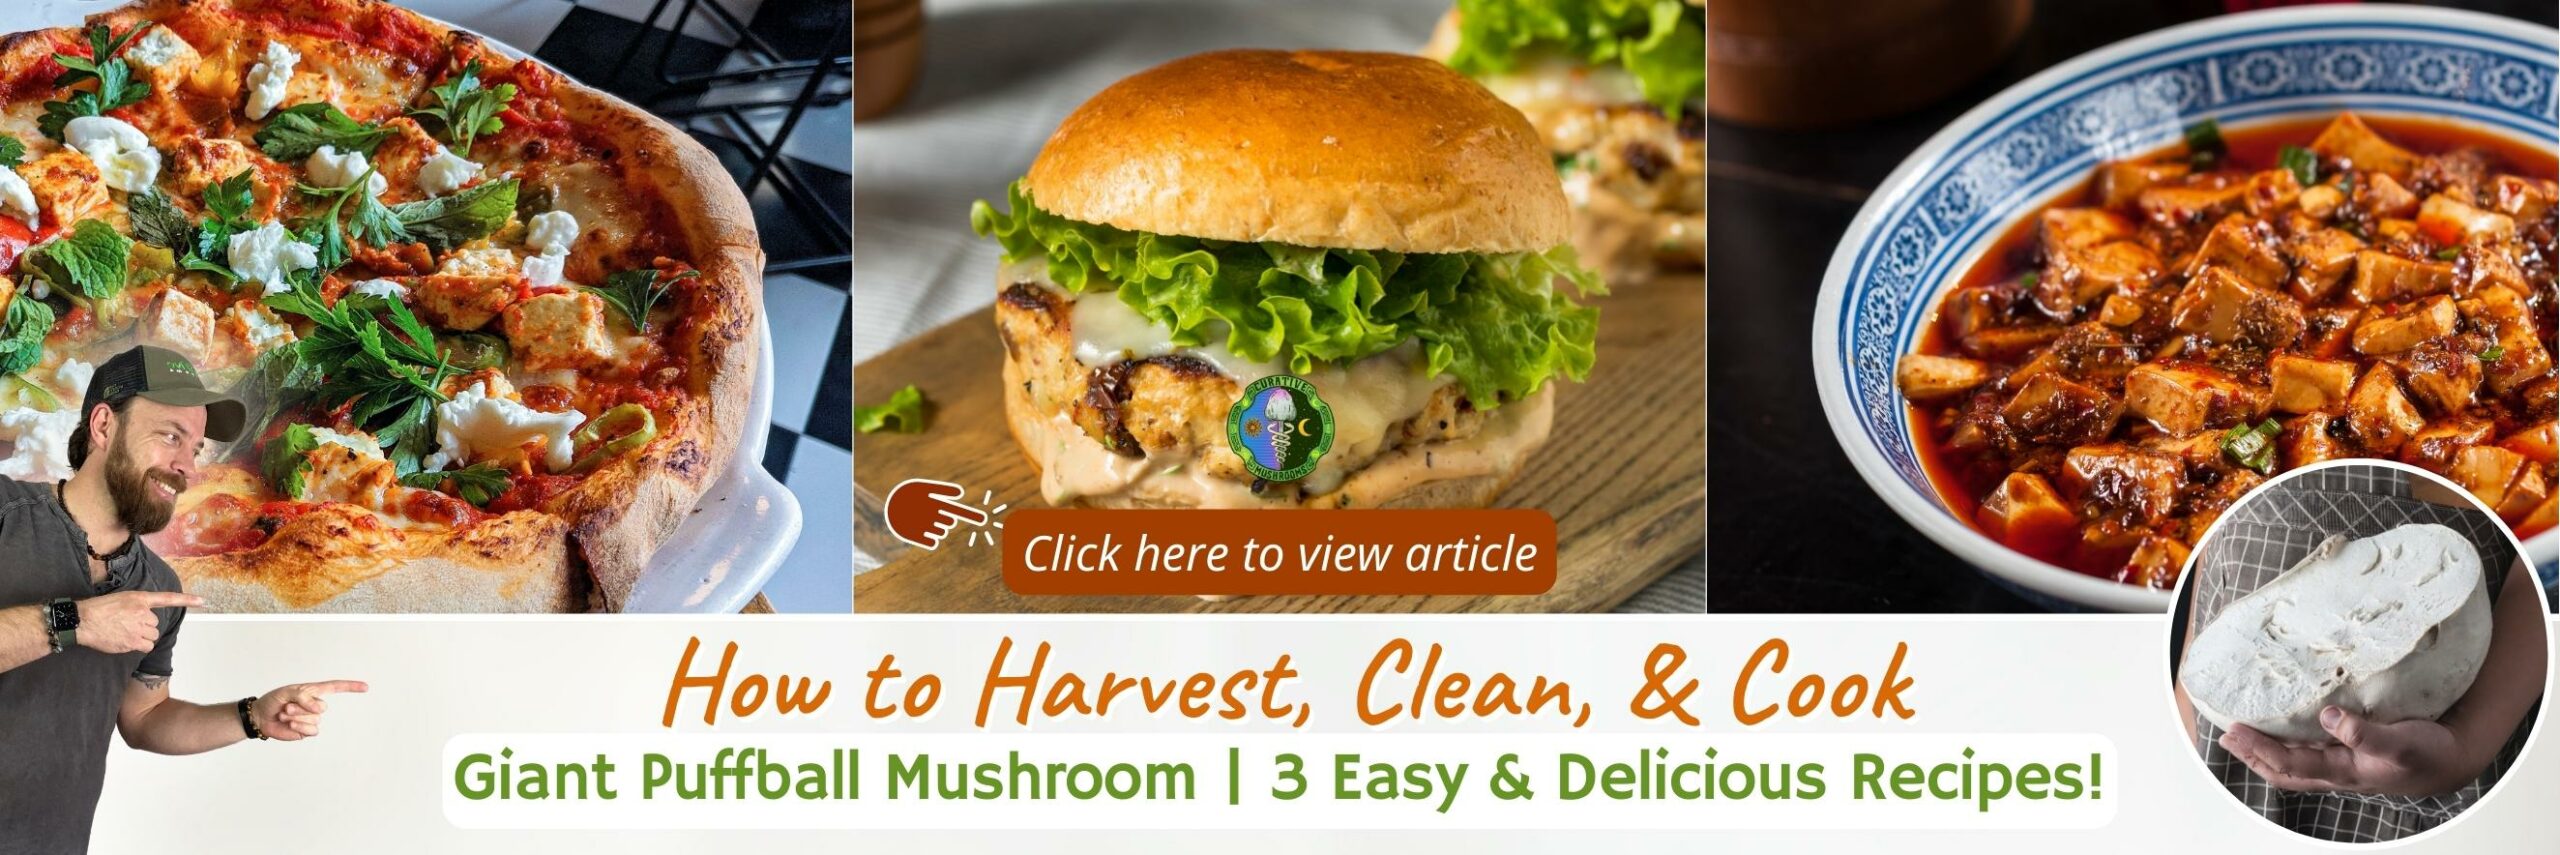 How to Harvest, Clean, & Cook Giant Puffball Mushroom - 3 Easy & Delicious Recipes - Click here to view article